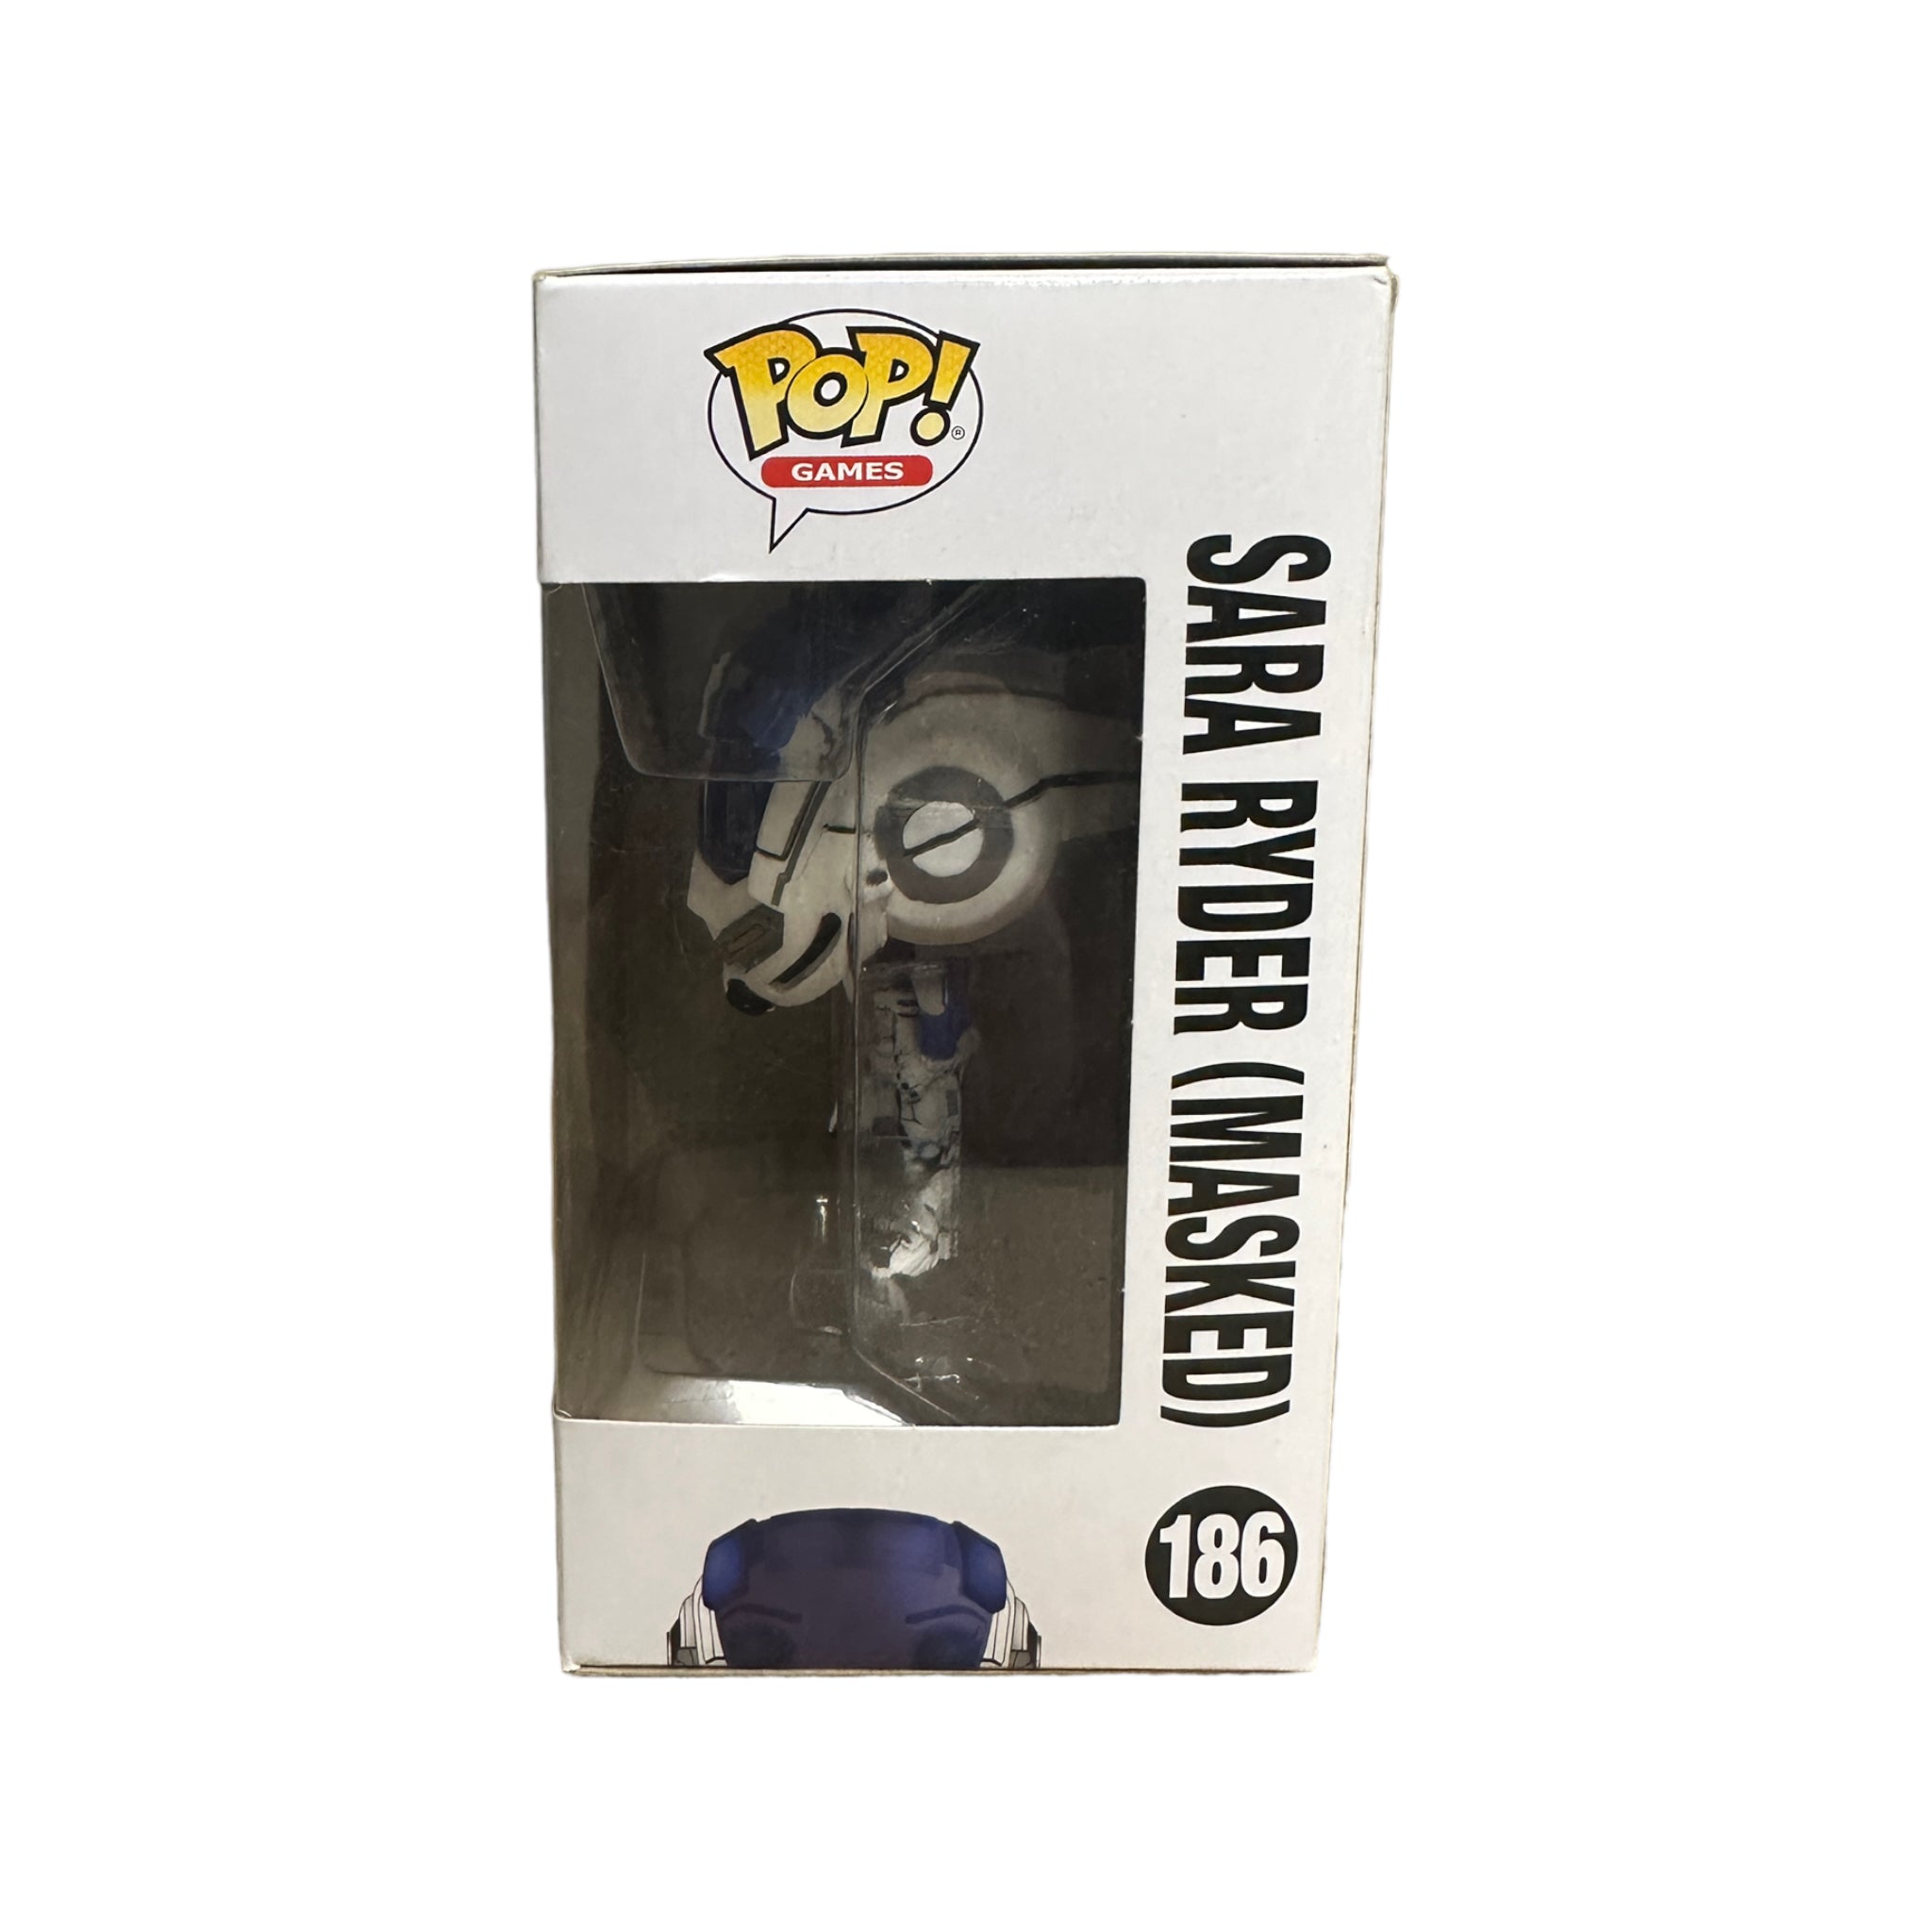 Sara Ryder (Masked) #186 Funko Pop! - Mass Effect: Andromeda - GameStop Exclusive - Condition 8/10